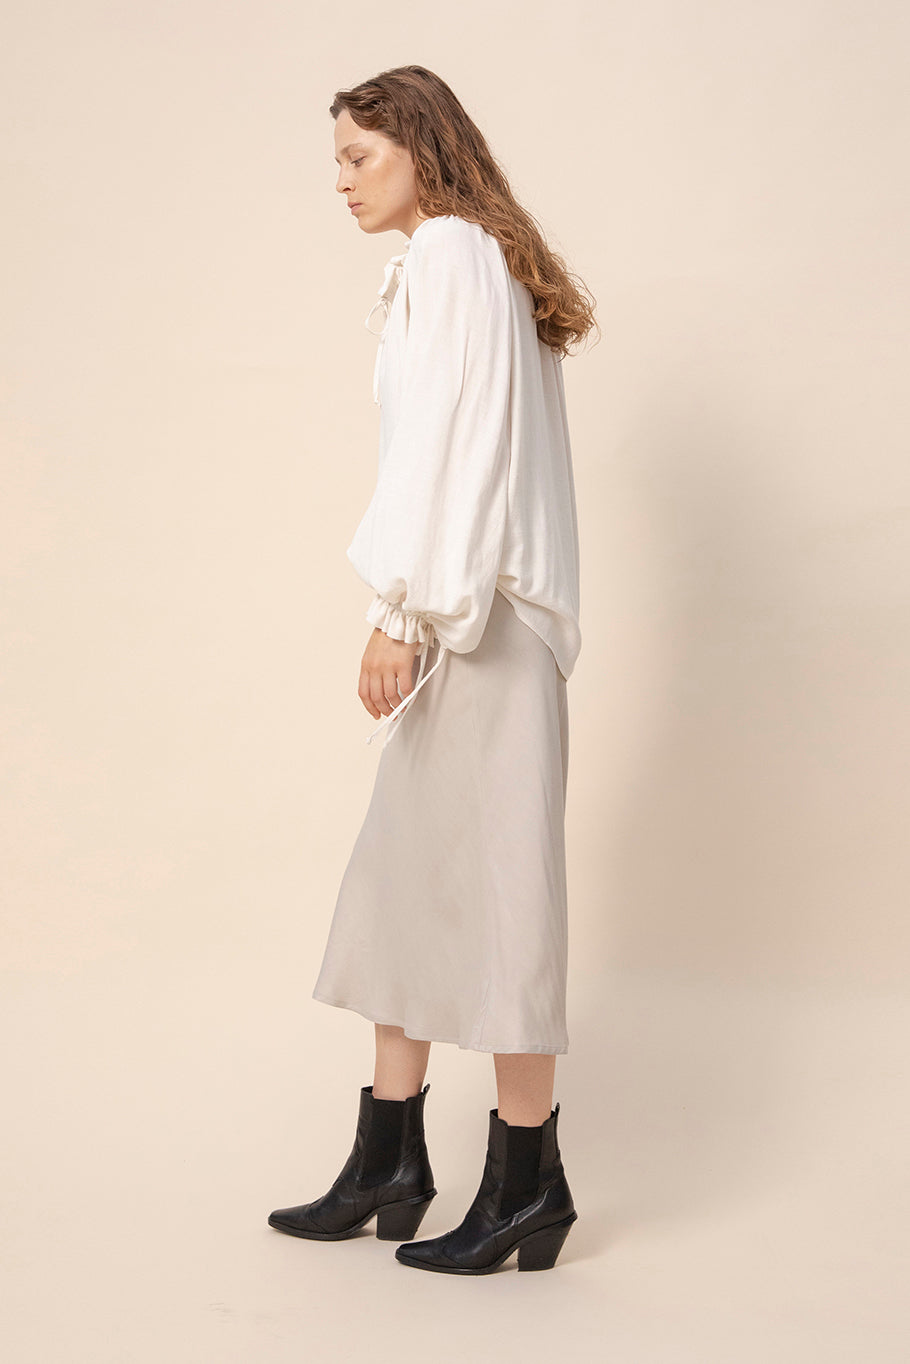 Tundra prairie blouse in natural white paired with light colored slip skirt. Sleeves tied to create a blouson sleeve. Hem tucked inside the skirt. Video. Hálo from north